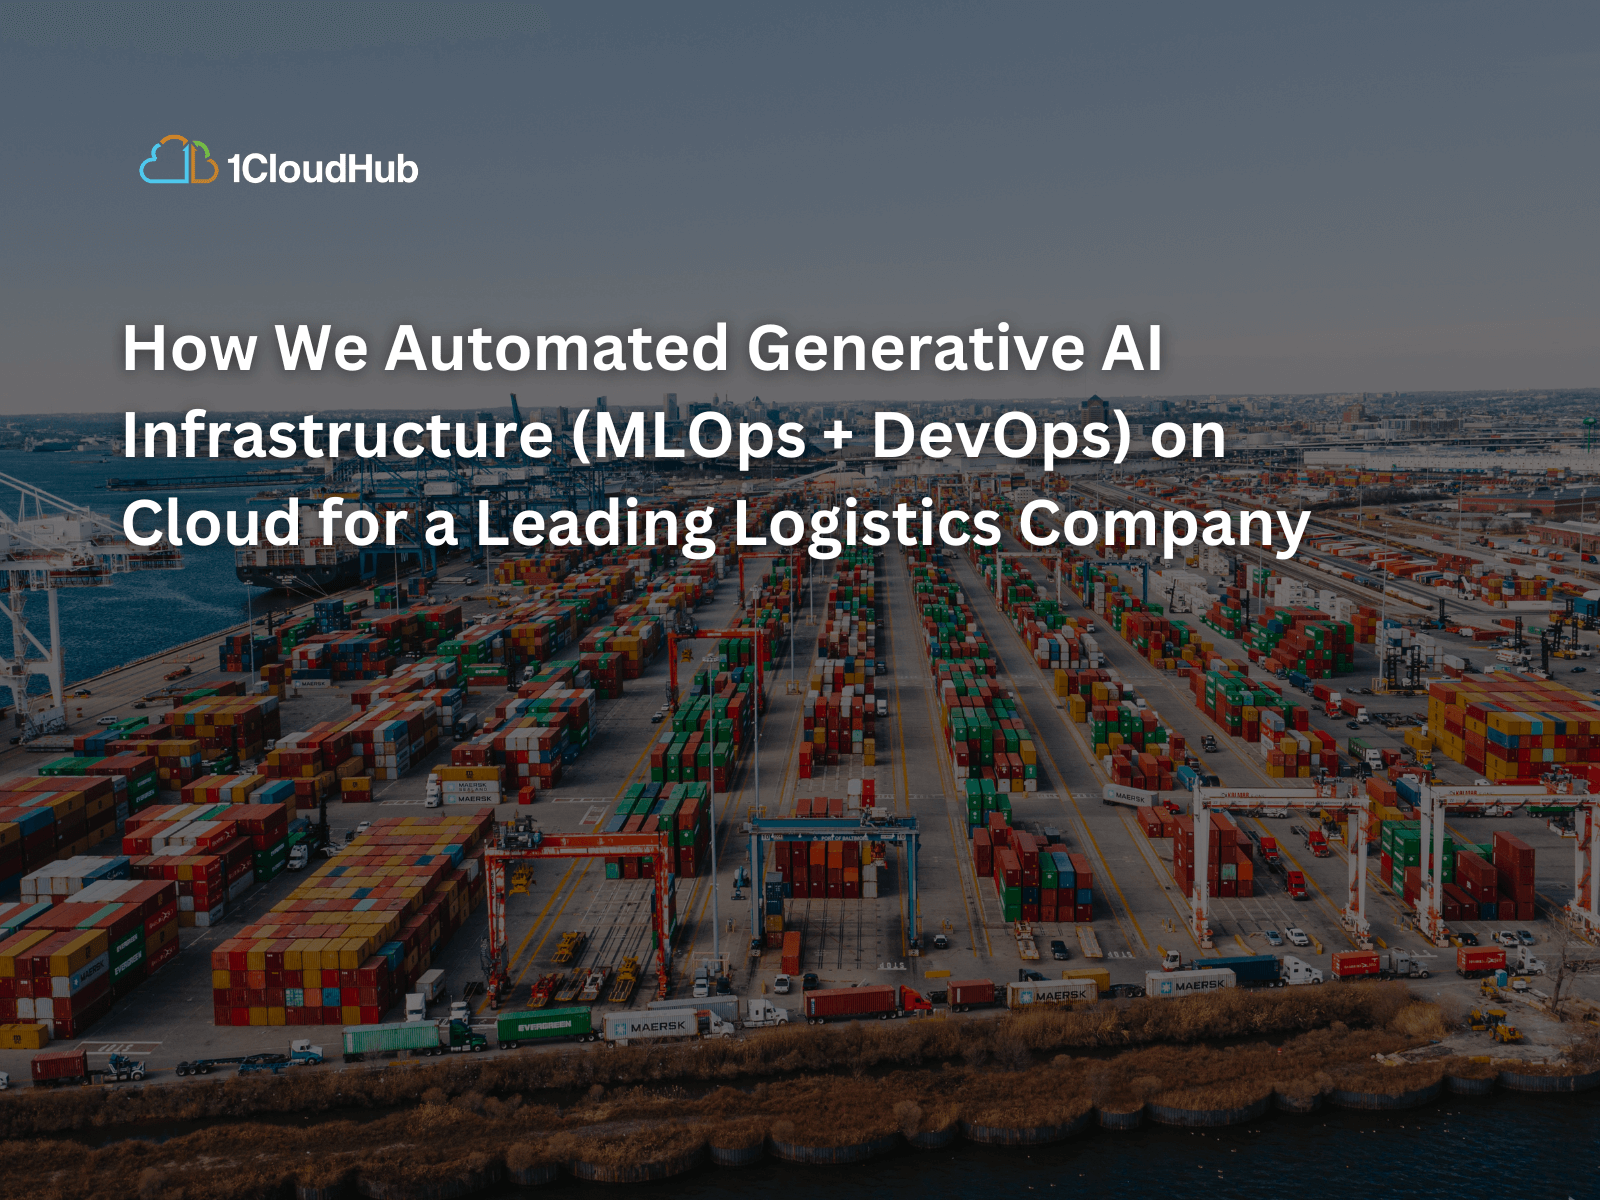 How We Automated Generative AI Infrastructure (MLOps + DevOps) on Cloud for a Leading Logistics Company